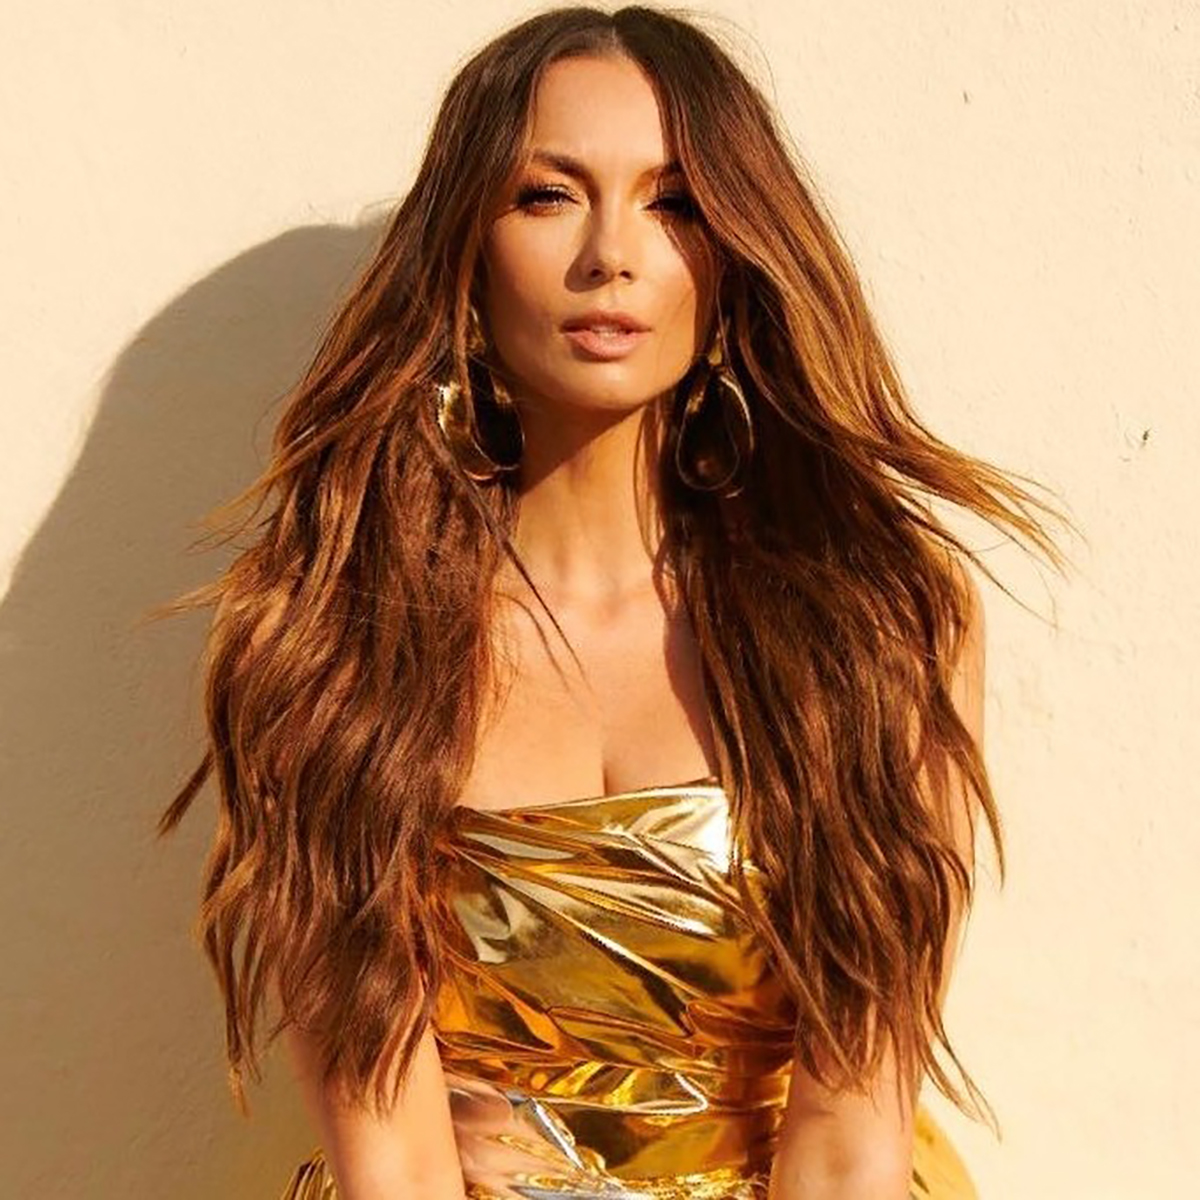 Ricki-Lee touches on being crazy in love in her new single, 'Last